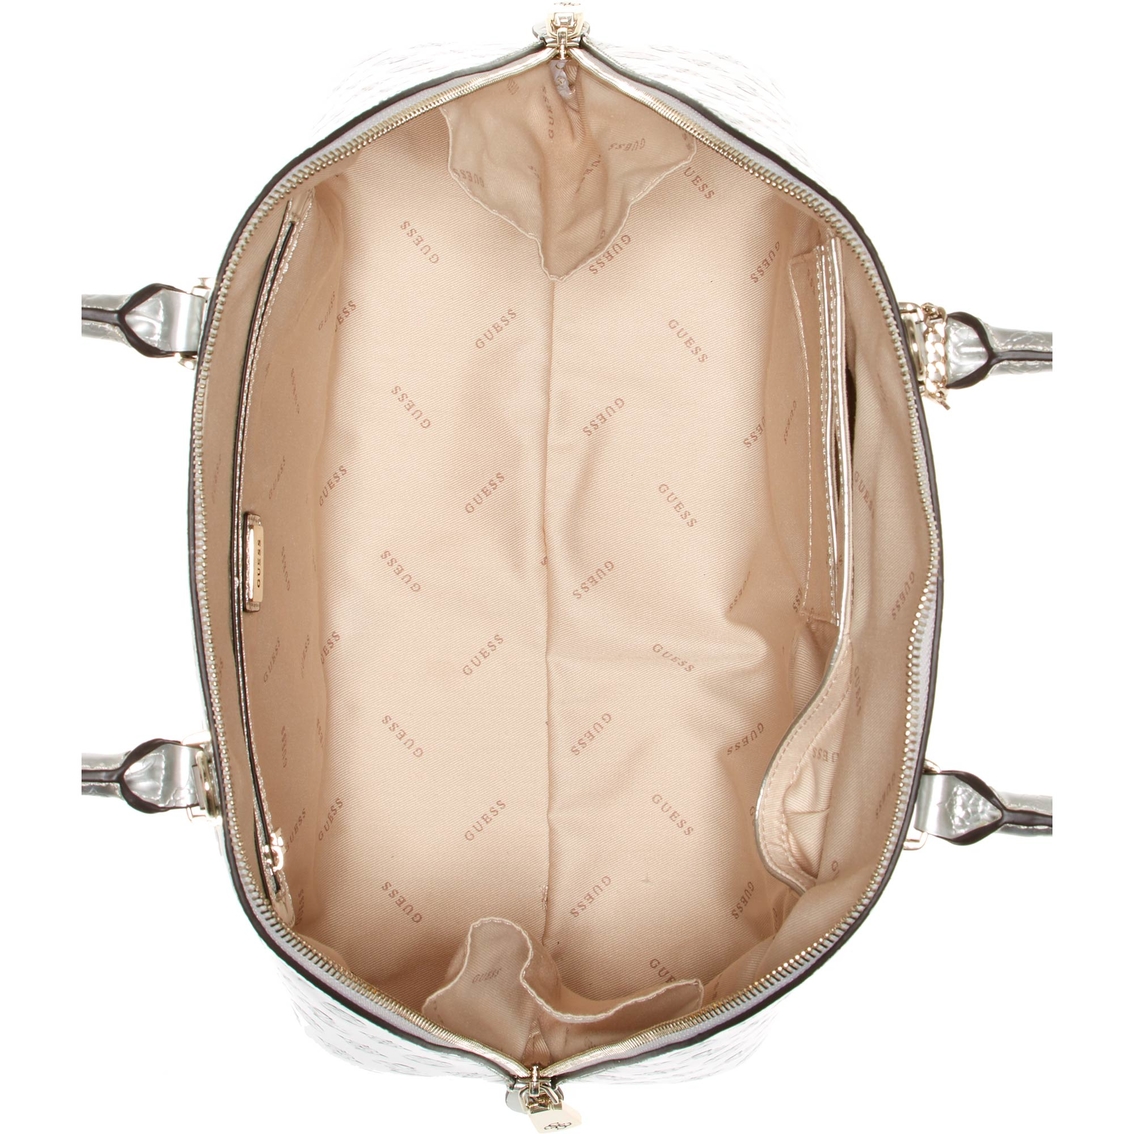 Guess Peony Dome Satchel - Image 3 of 3